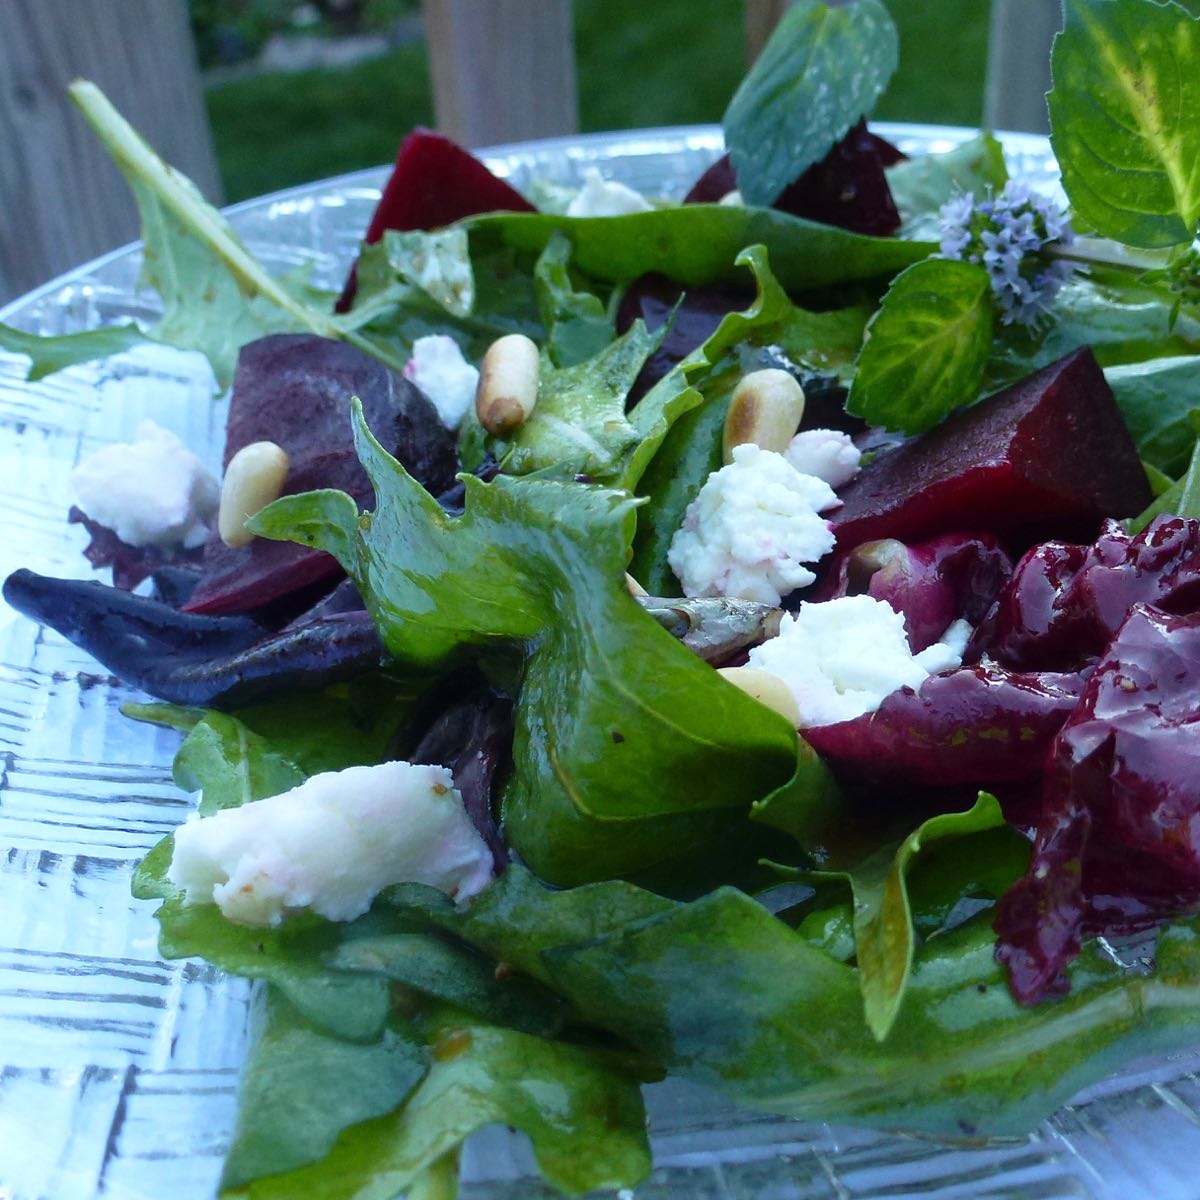 A plate of Salad with Beets, Goat Cheese and Pine Nuts.